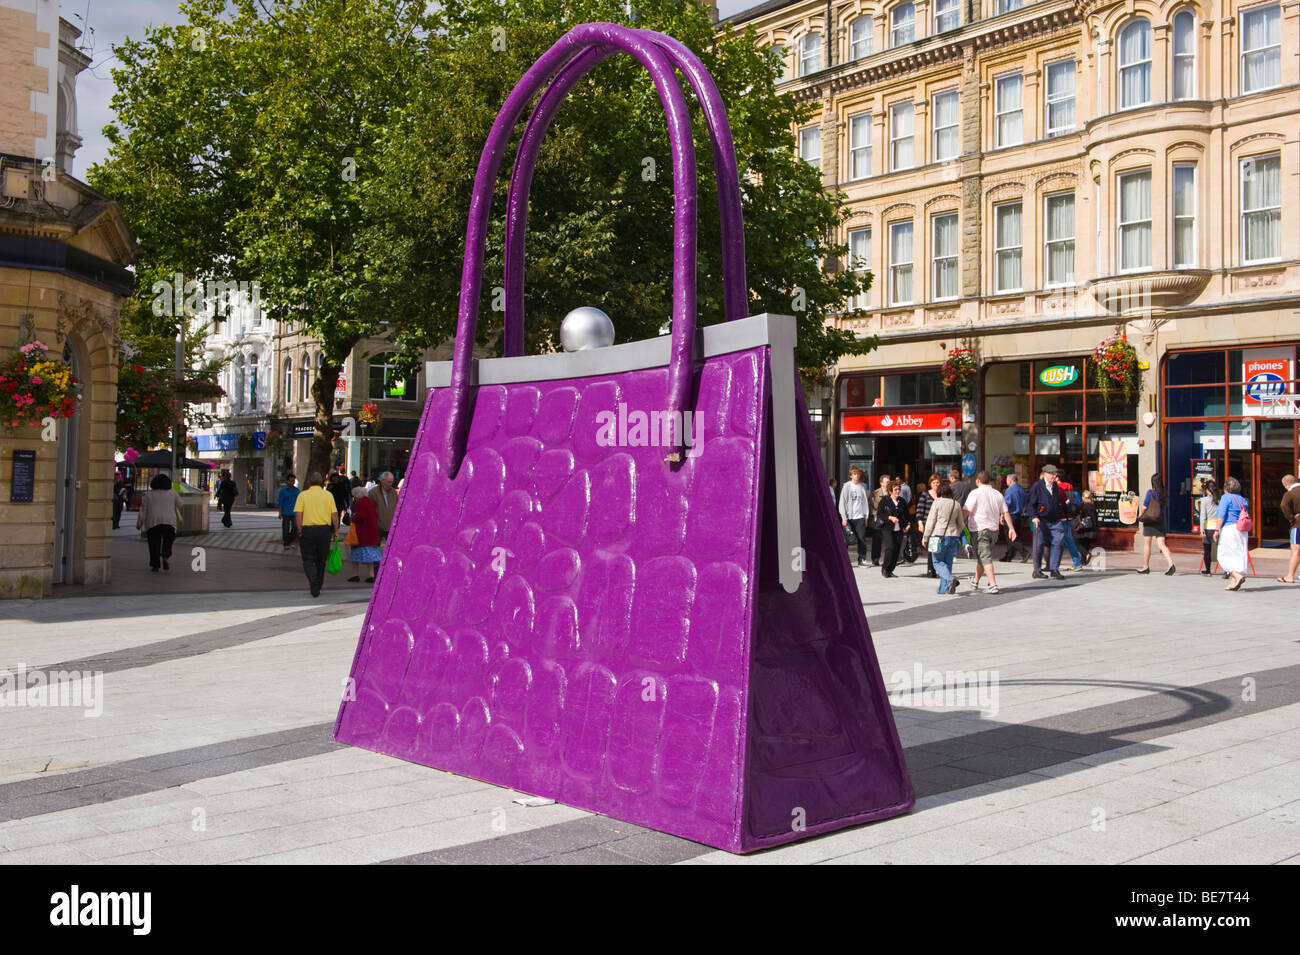 Giant handbag in shopping street to promote opening of new John Lewis store in Cardiff South Wales UK Stock Photo